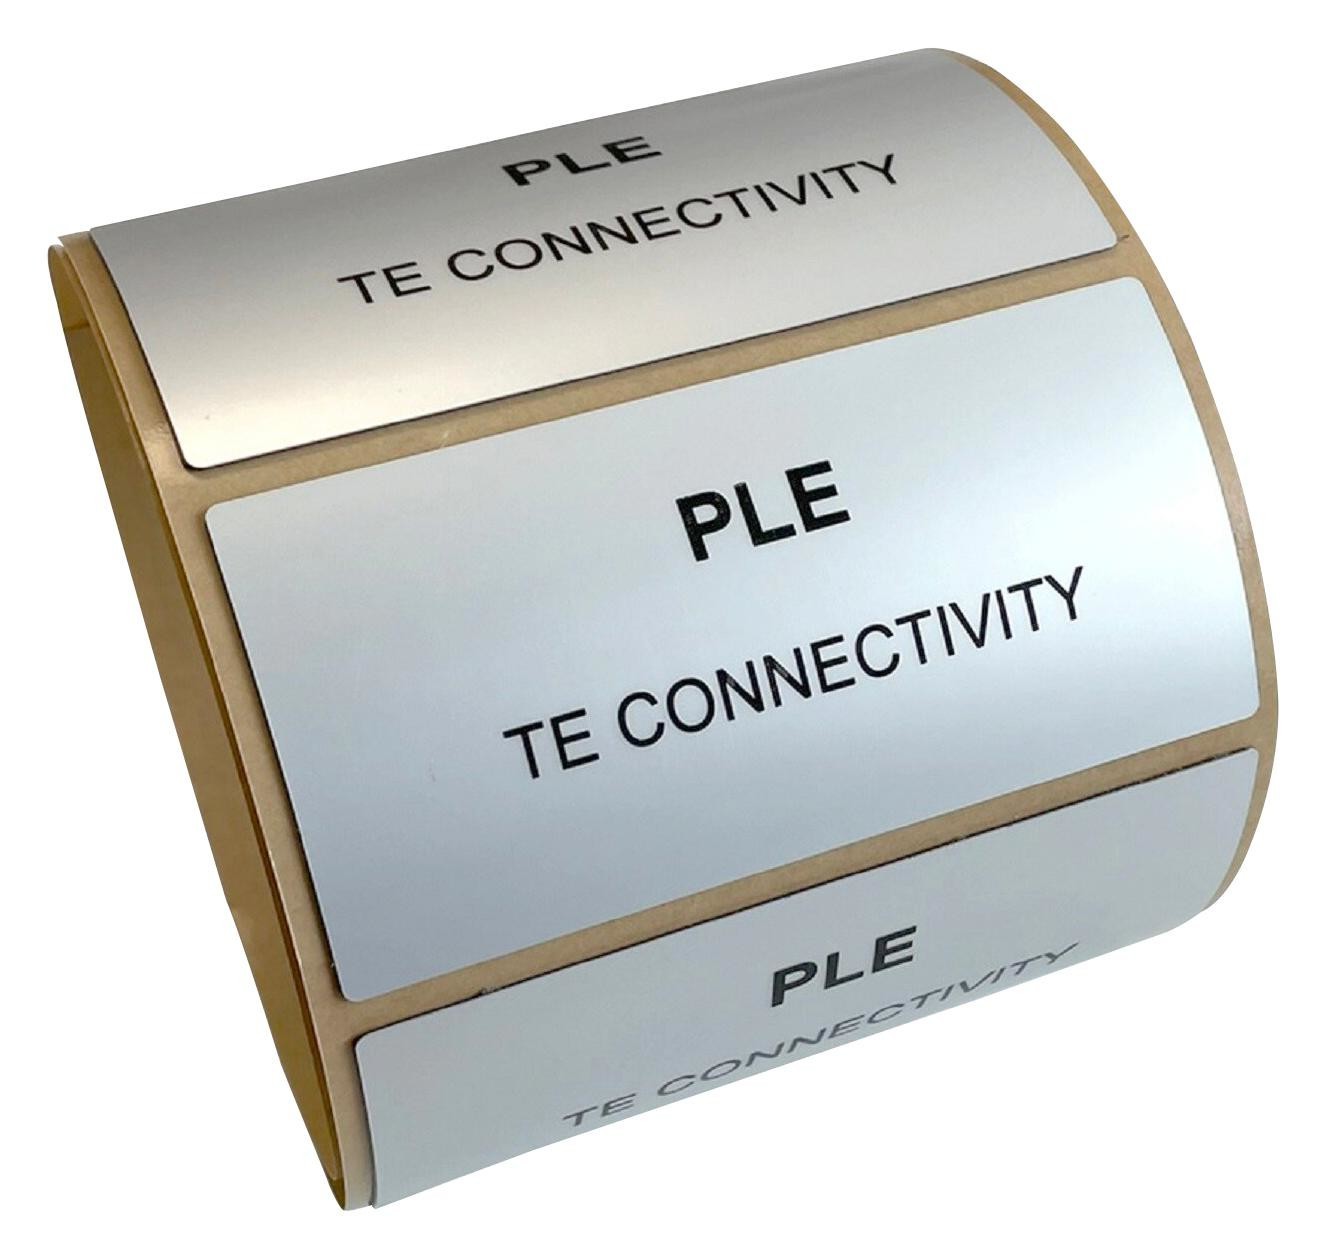 Entrelec TE Connectivity Ple-060030-Gy-0.4 Label, Polyester, Grey, 60mm X 30mm